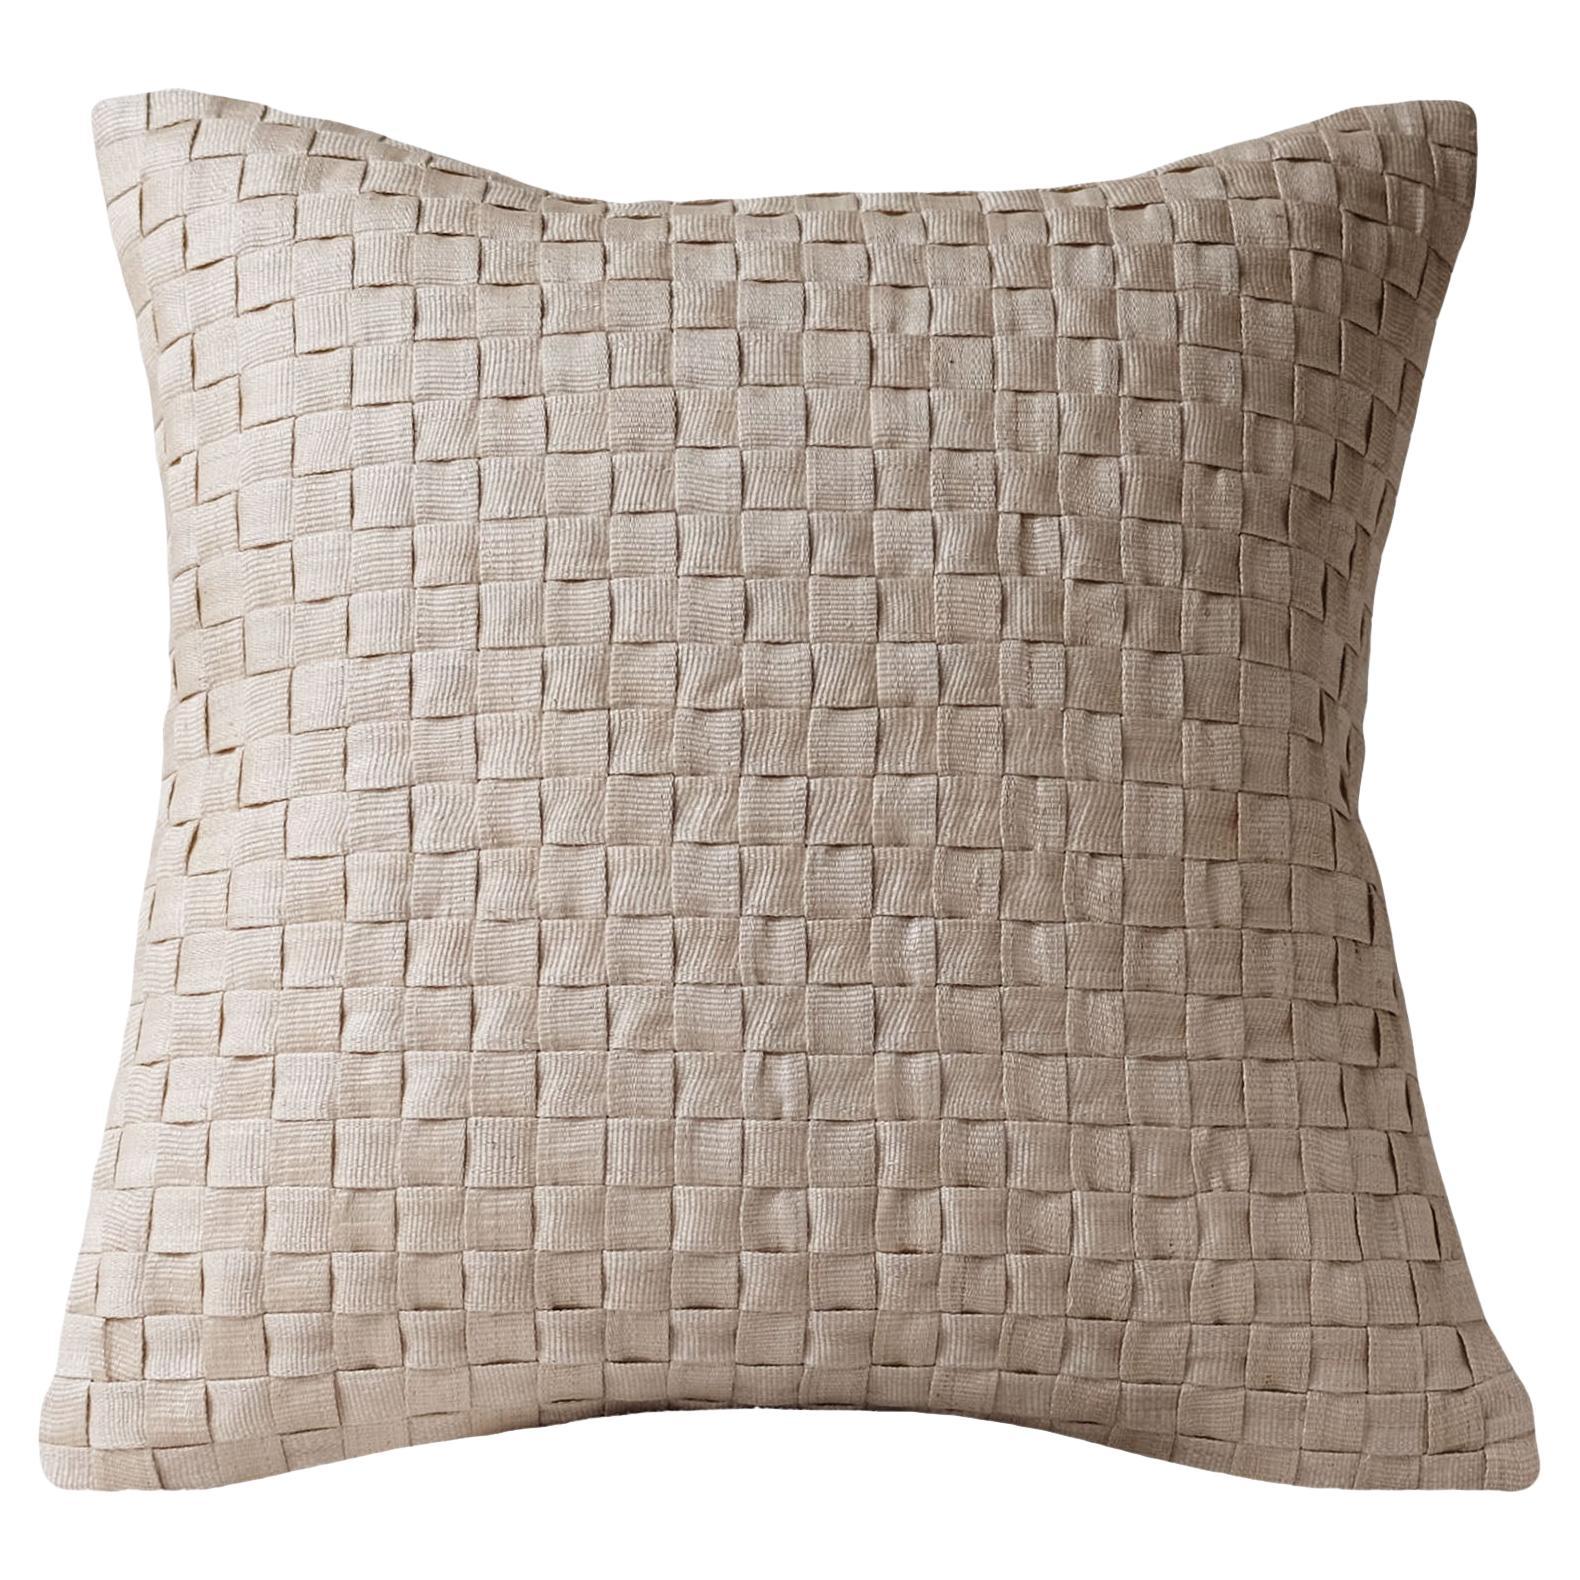 Handcrafted T'nalak Banig Weave Cushion Cover in Light Sand For Sale